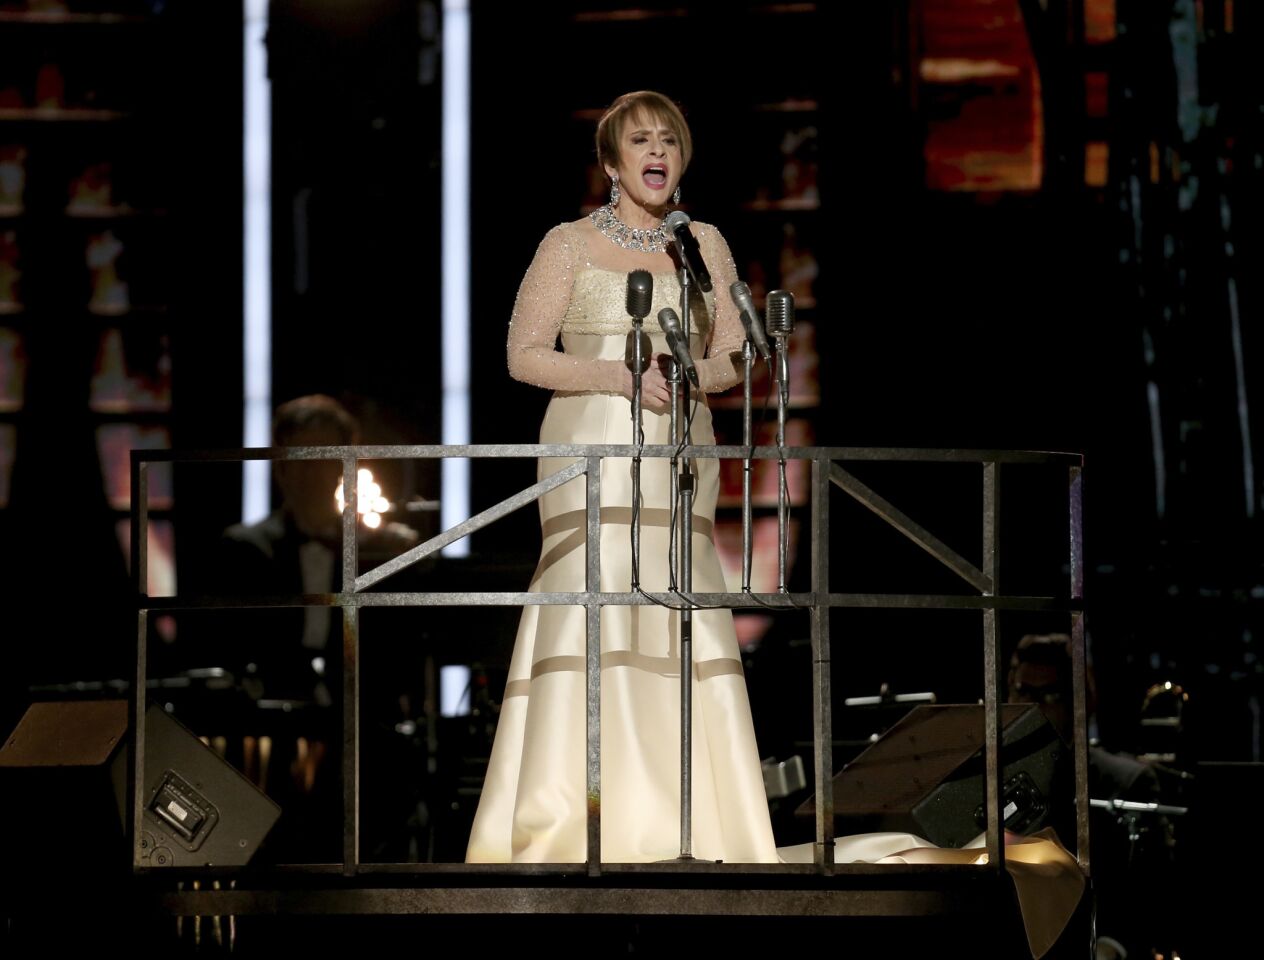 Patti LuPone performs "Don't Cry For Me Argentina" during a tribute to Leonard Bernstein and Andrew Lloyd Webber.